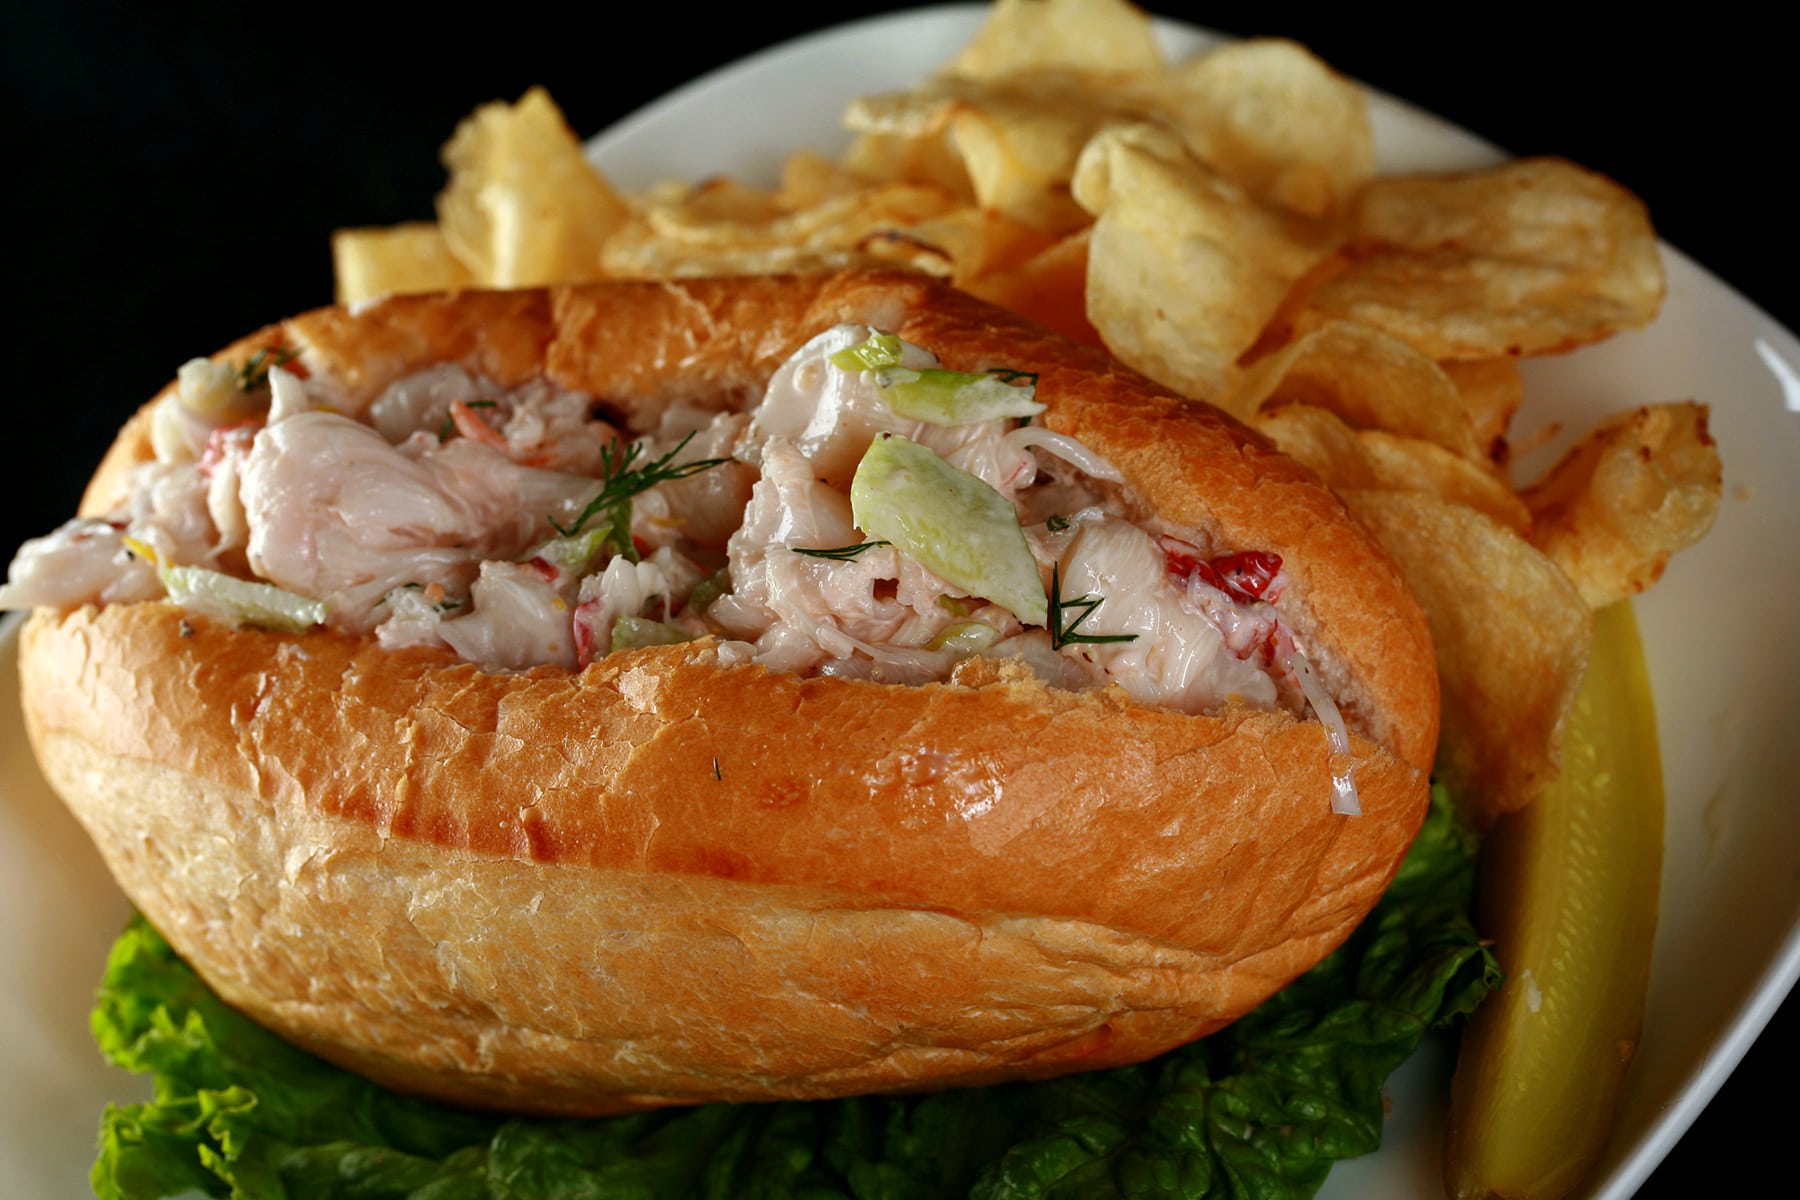 The Best Lobster Roll sandwich on a plate with chips and a pickle.